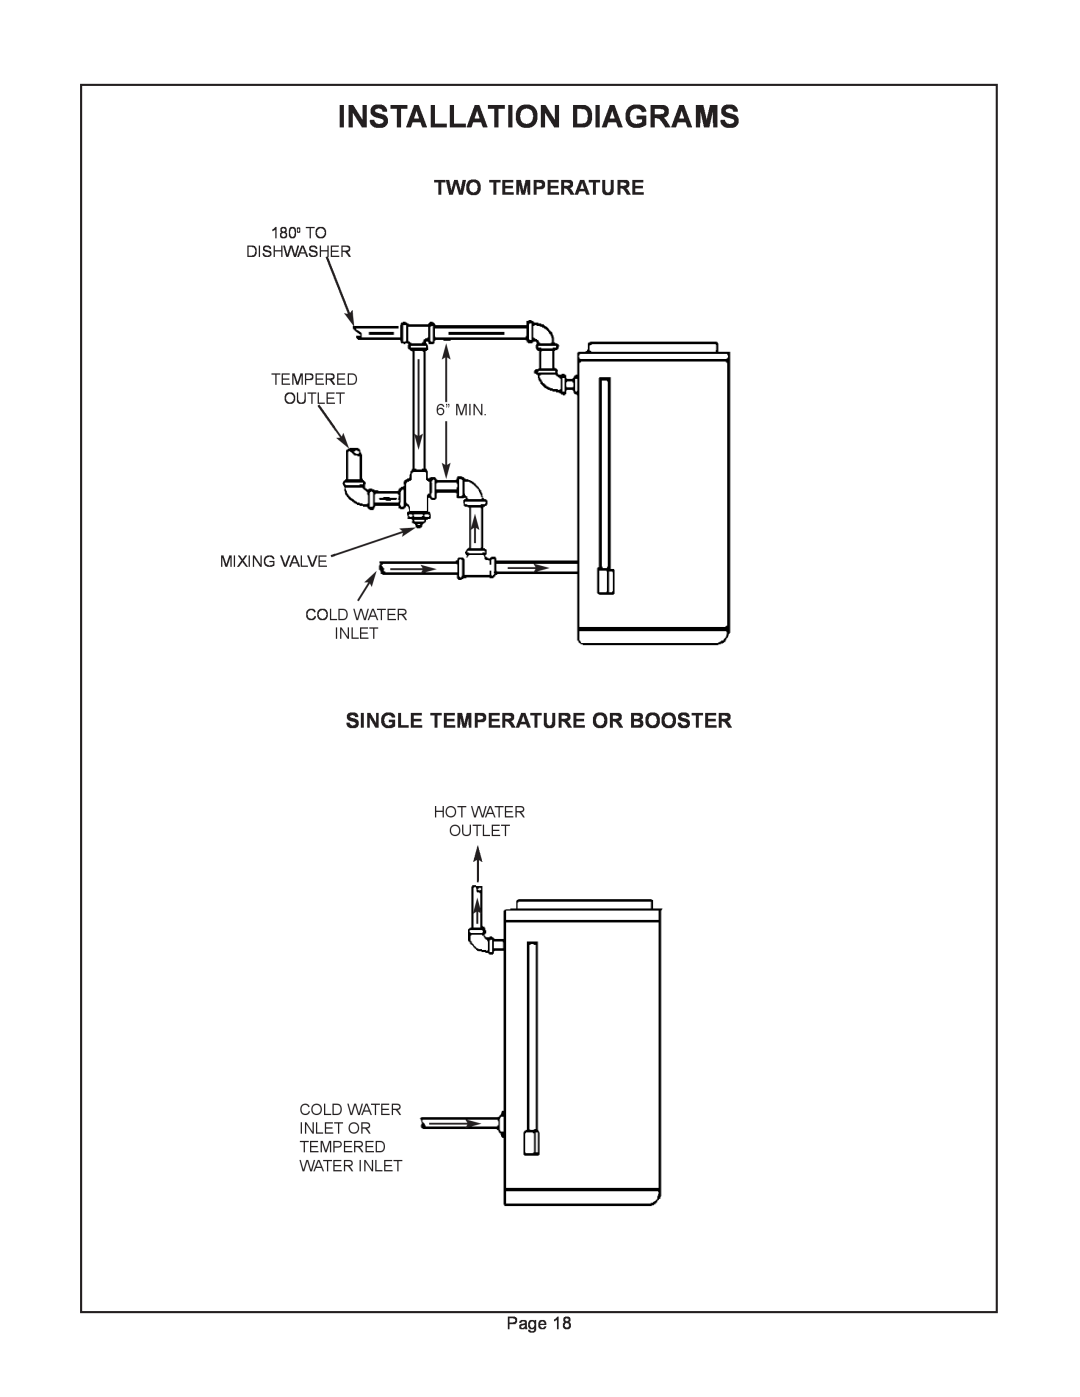 GSW G65 instruction manual Installation Diagrams, Two Temperature, Single Temperature Or Booster 